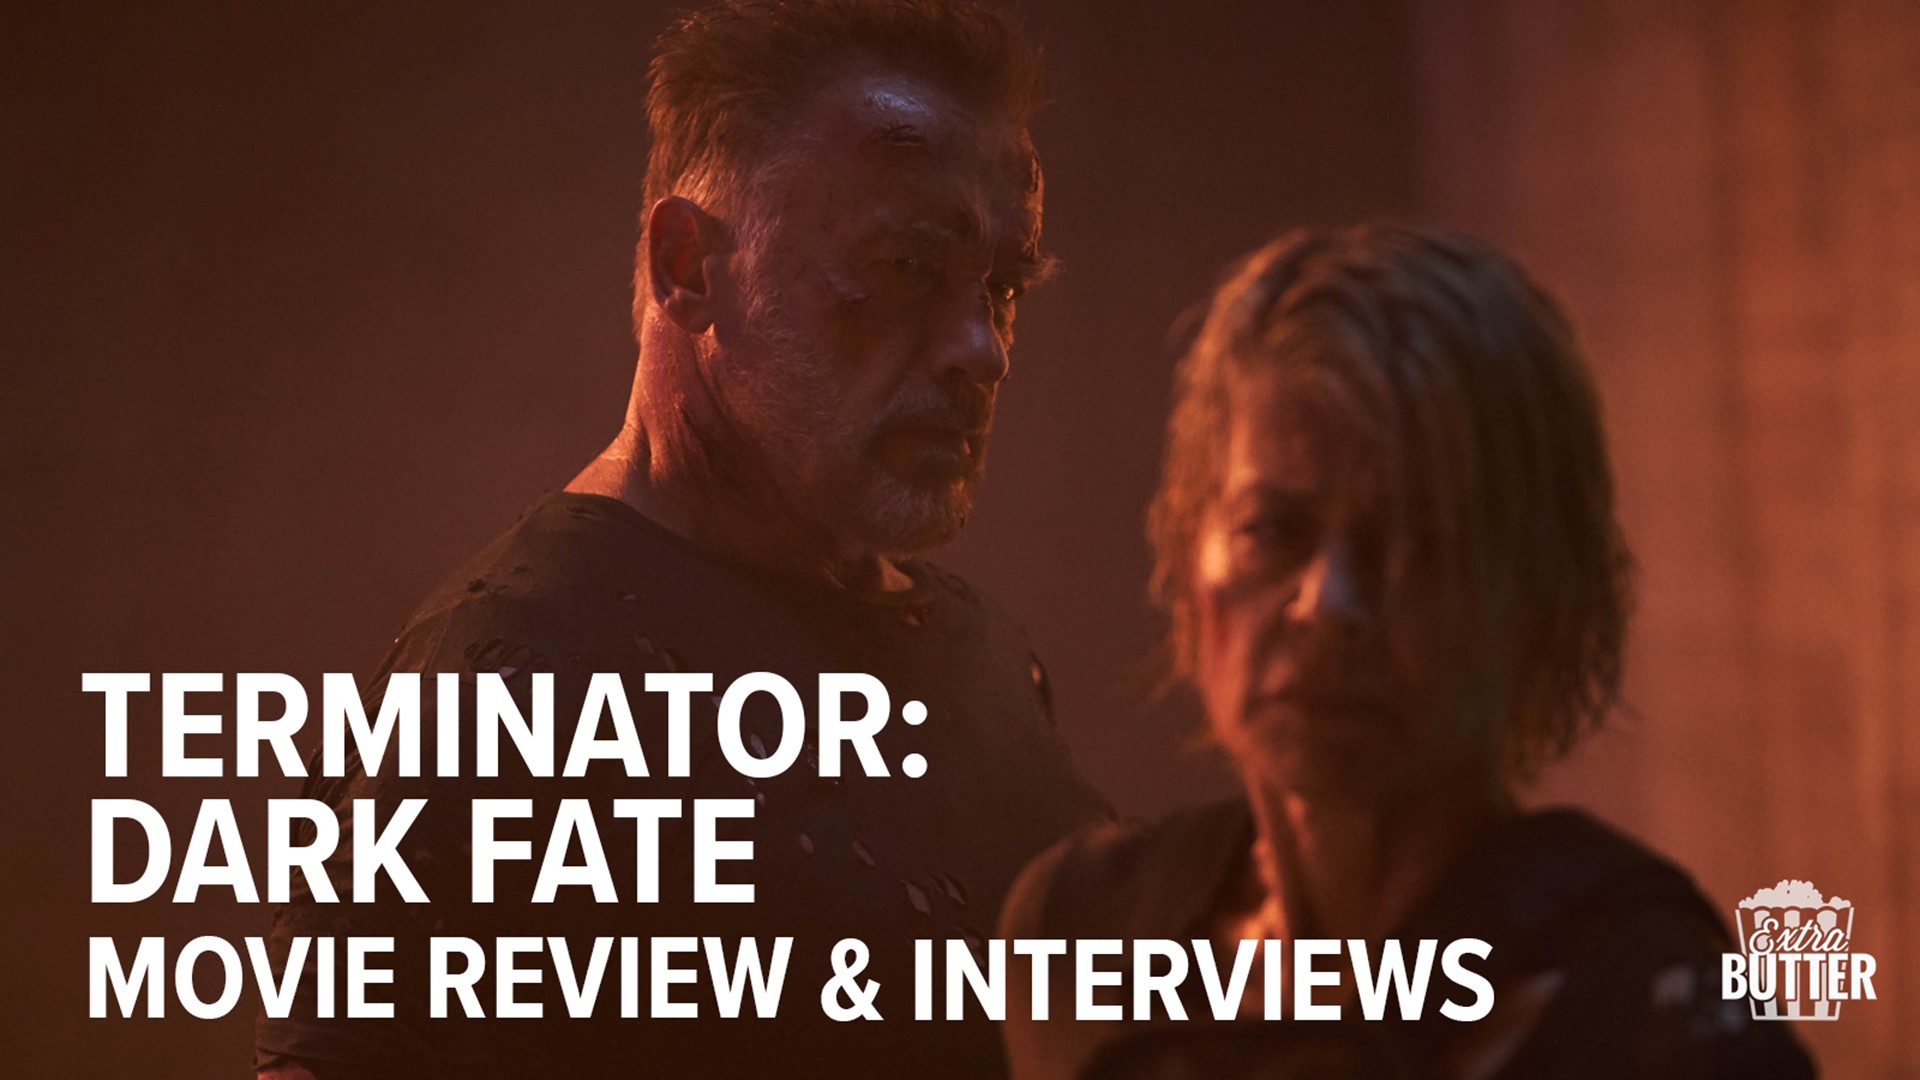 Extra Butter reviews 'Terminator: Dark Fate' and talks with the cast of the movie. Linda Hamilton talks about the journey her character Sarah Connor has been on.